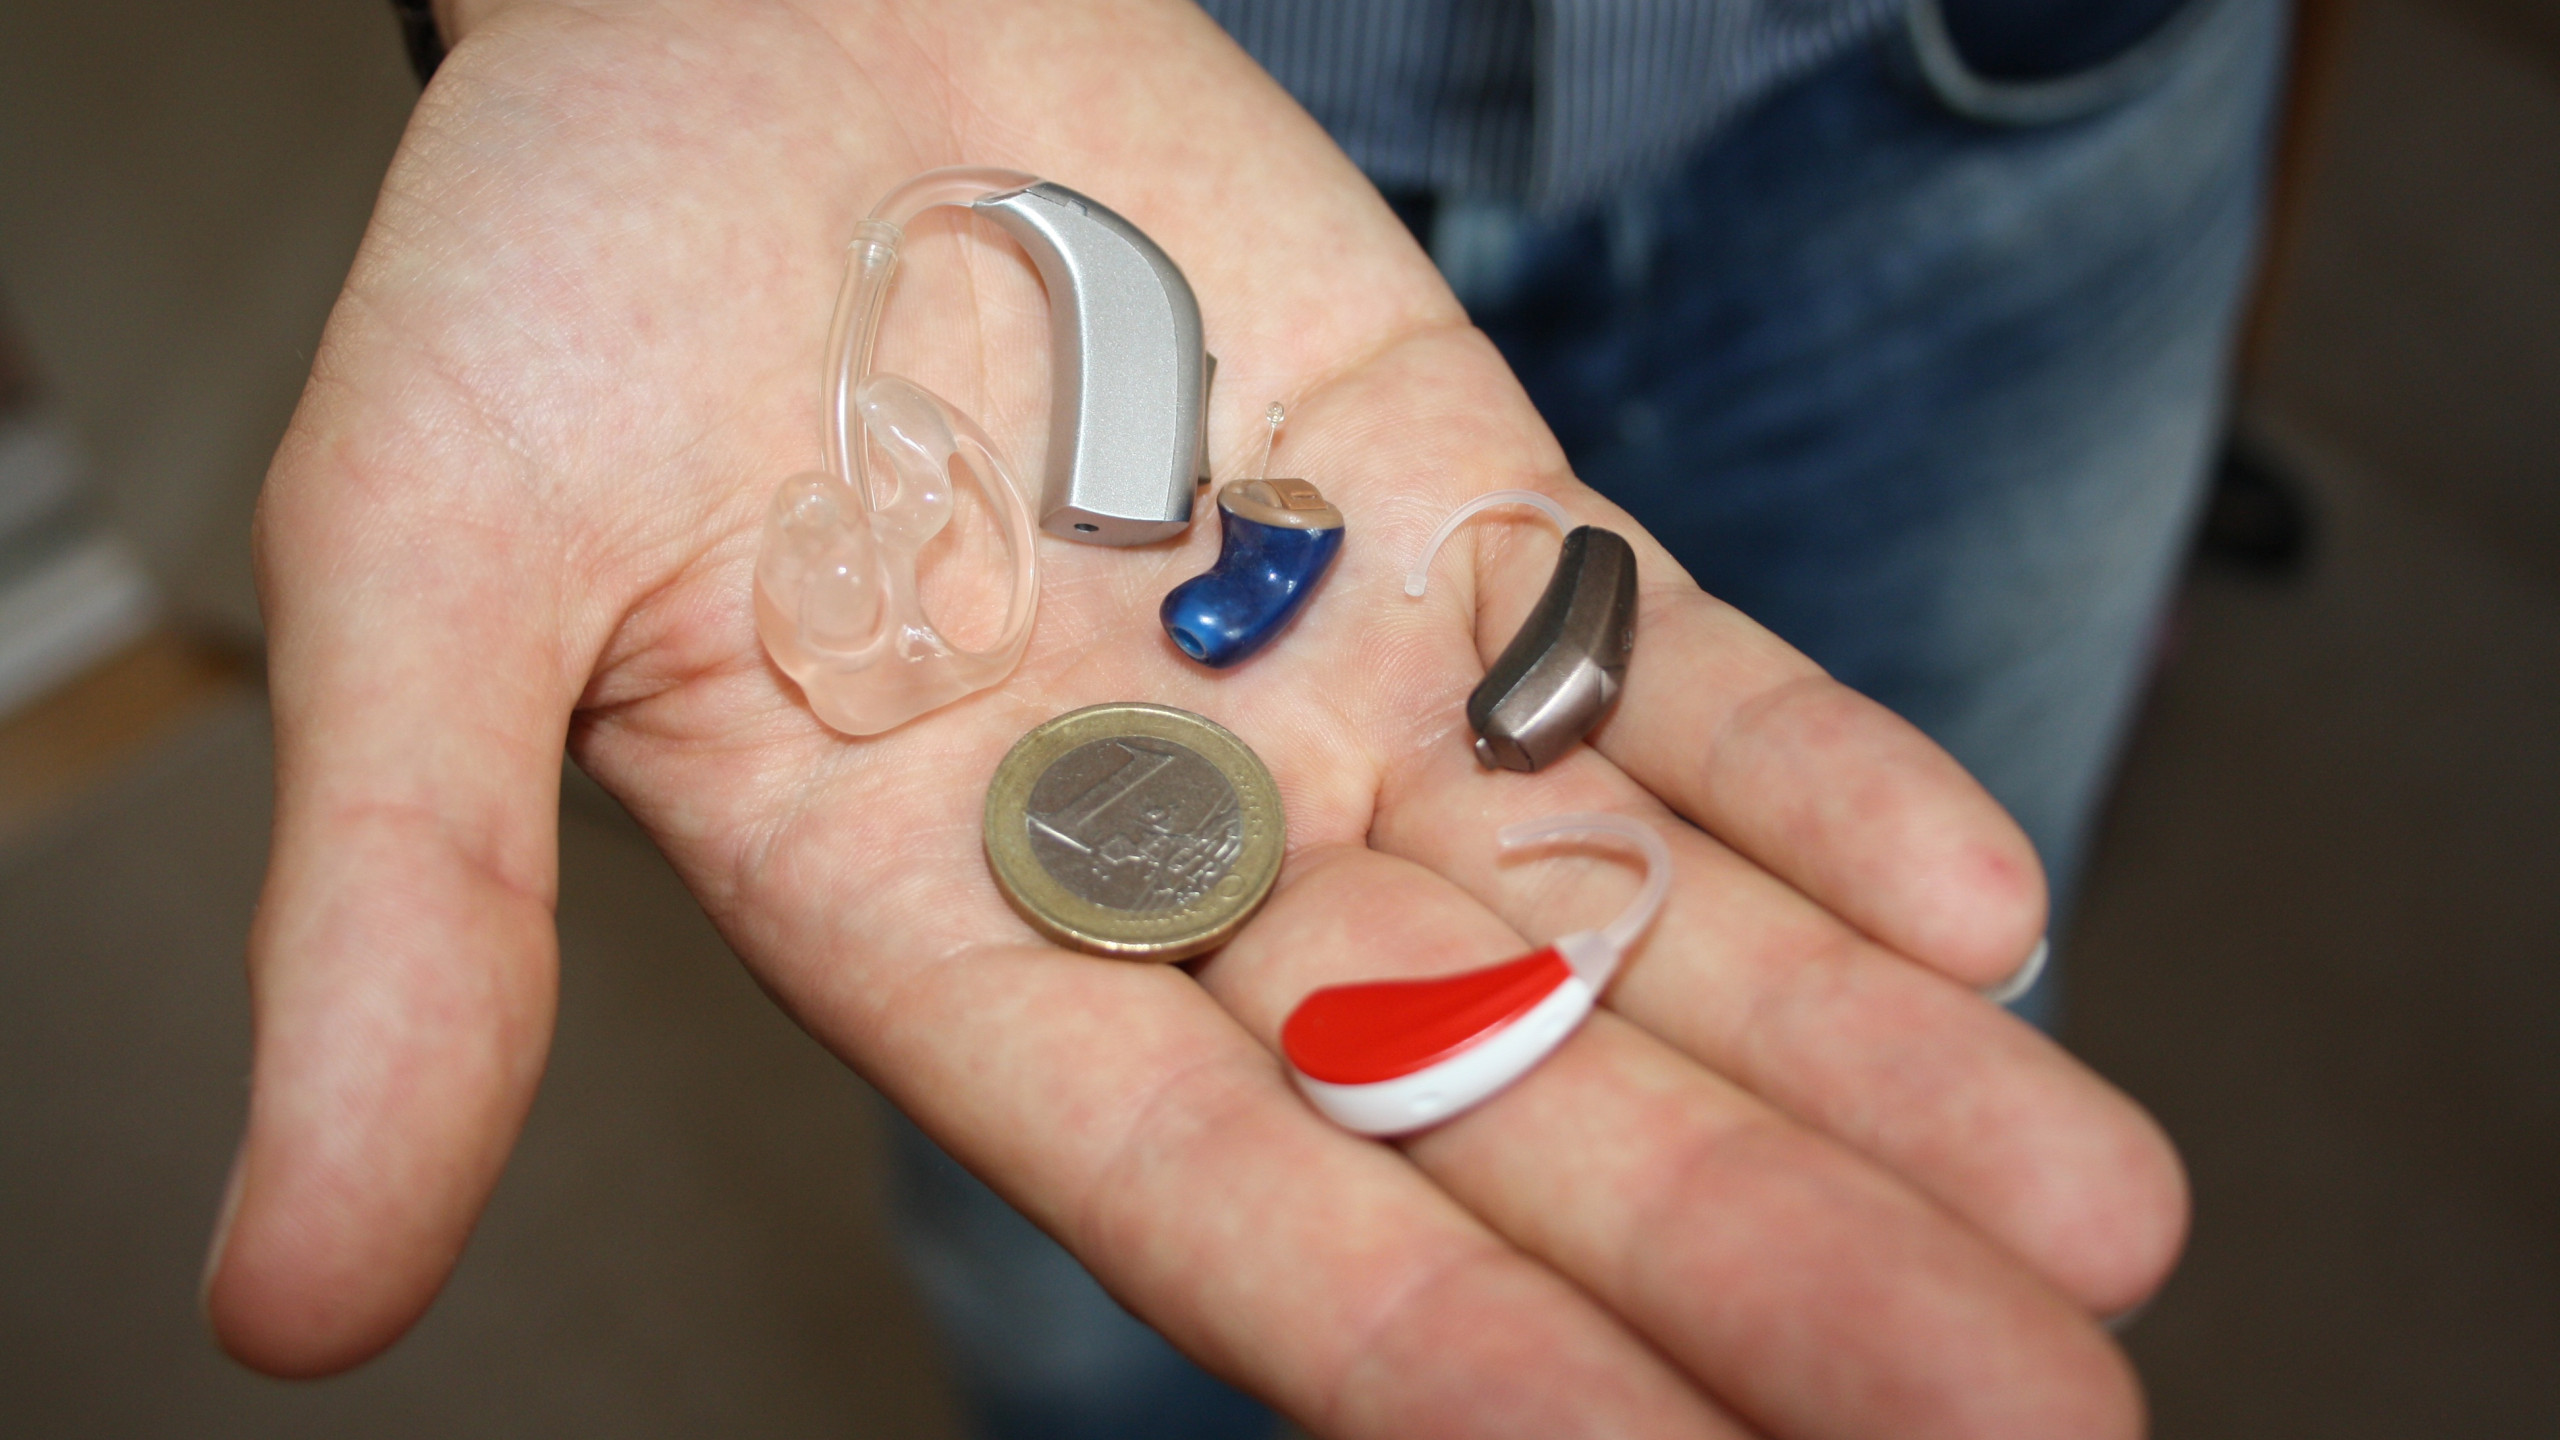 Man holding a selection of hearing aids and a one Euro coin.